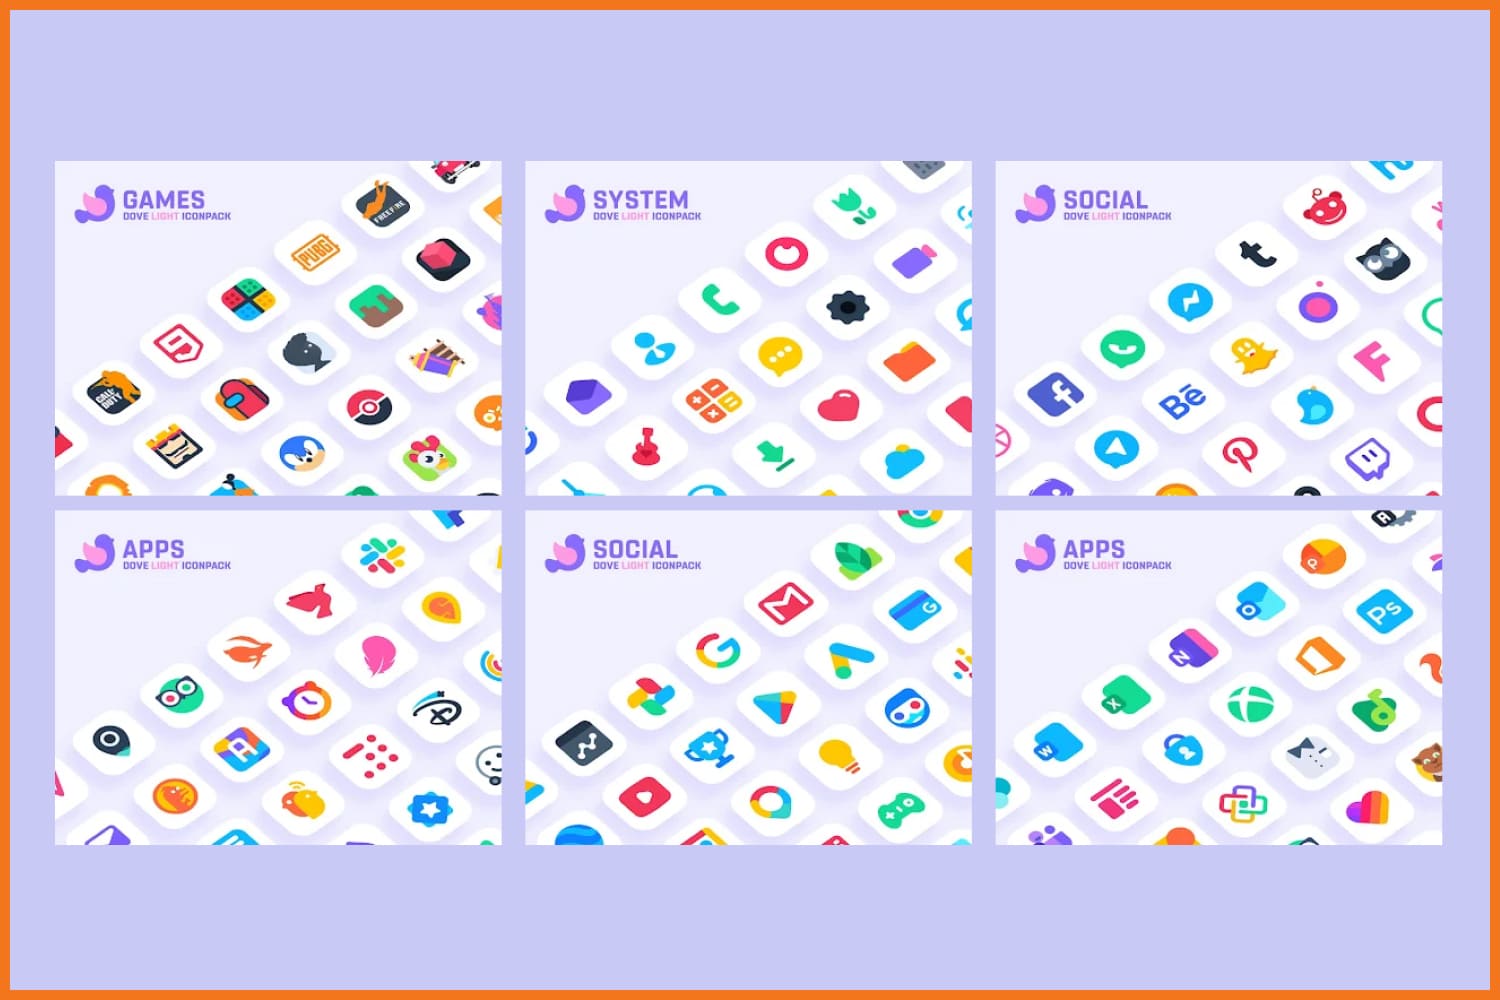 Collage of icons for applications for different needs.